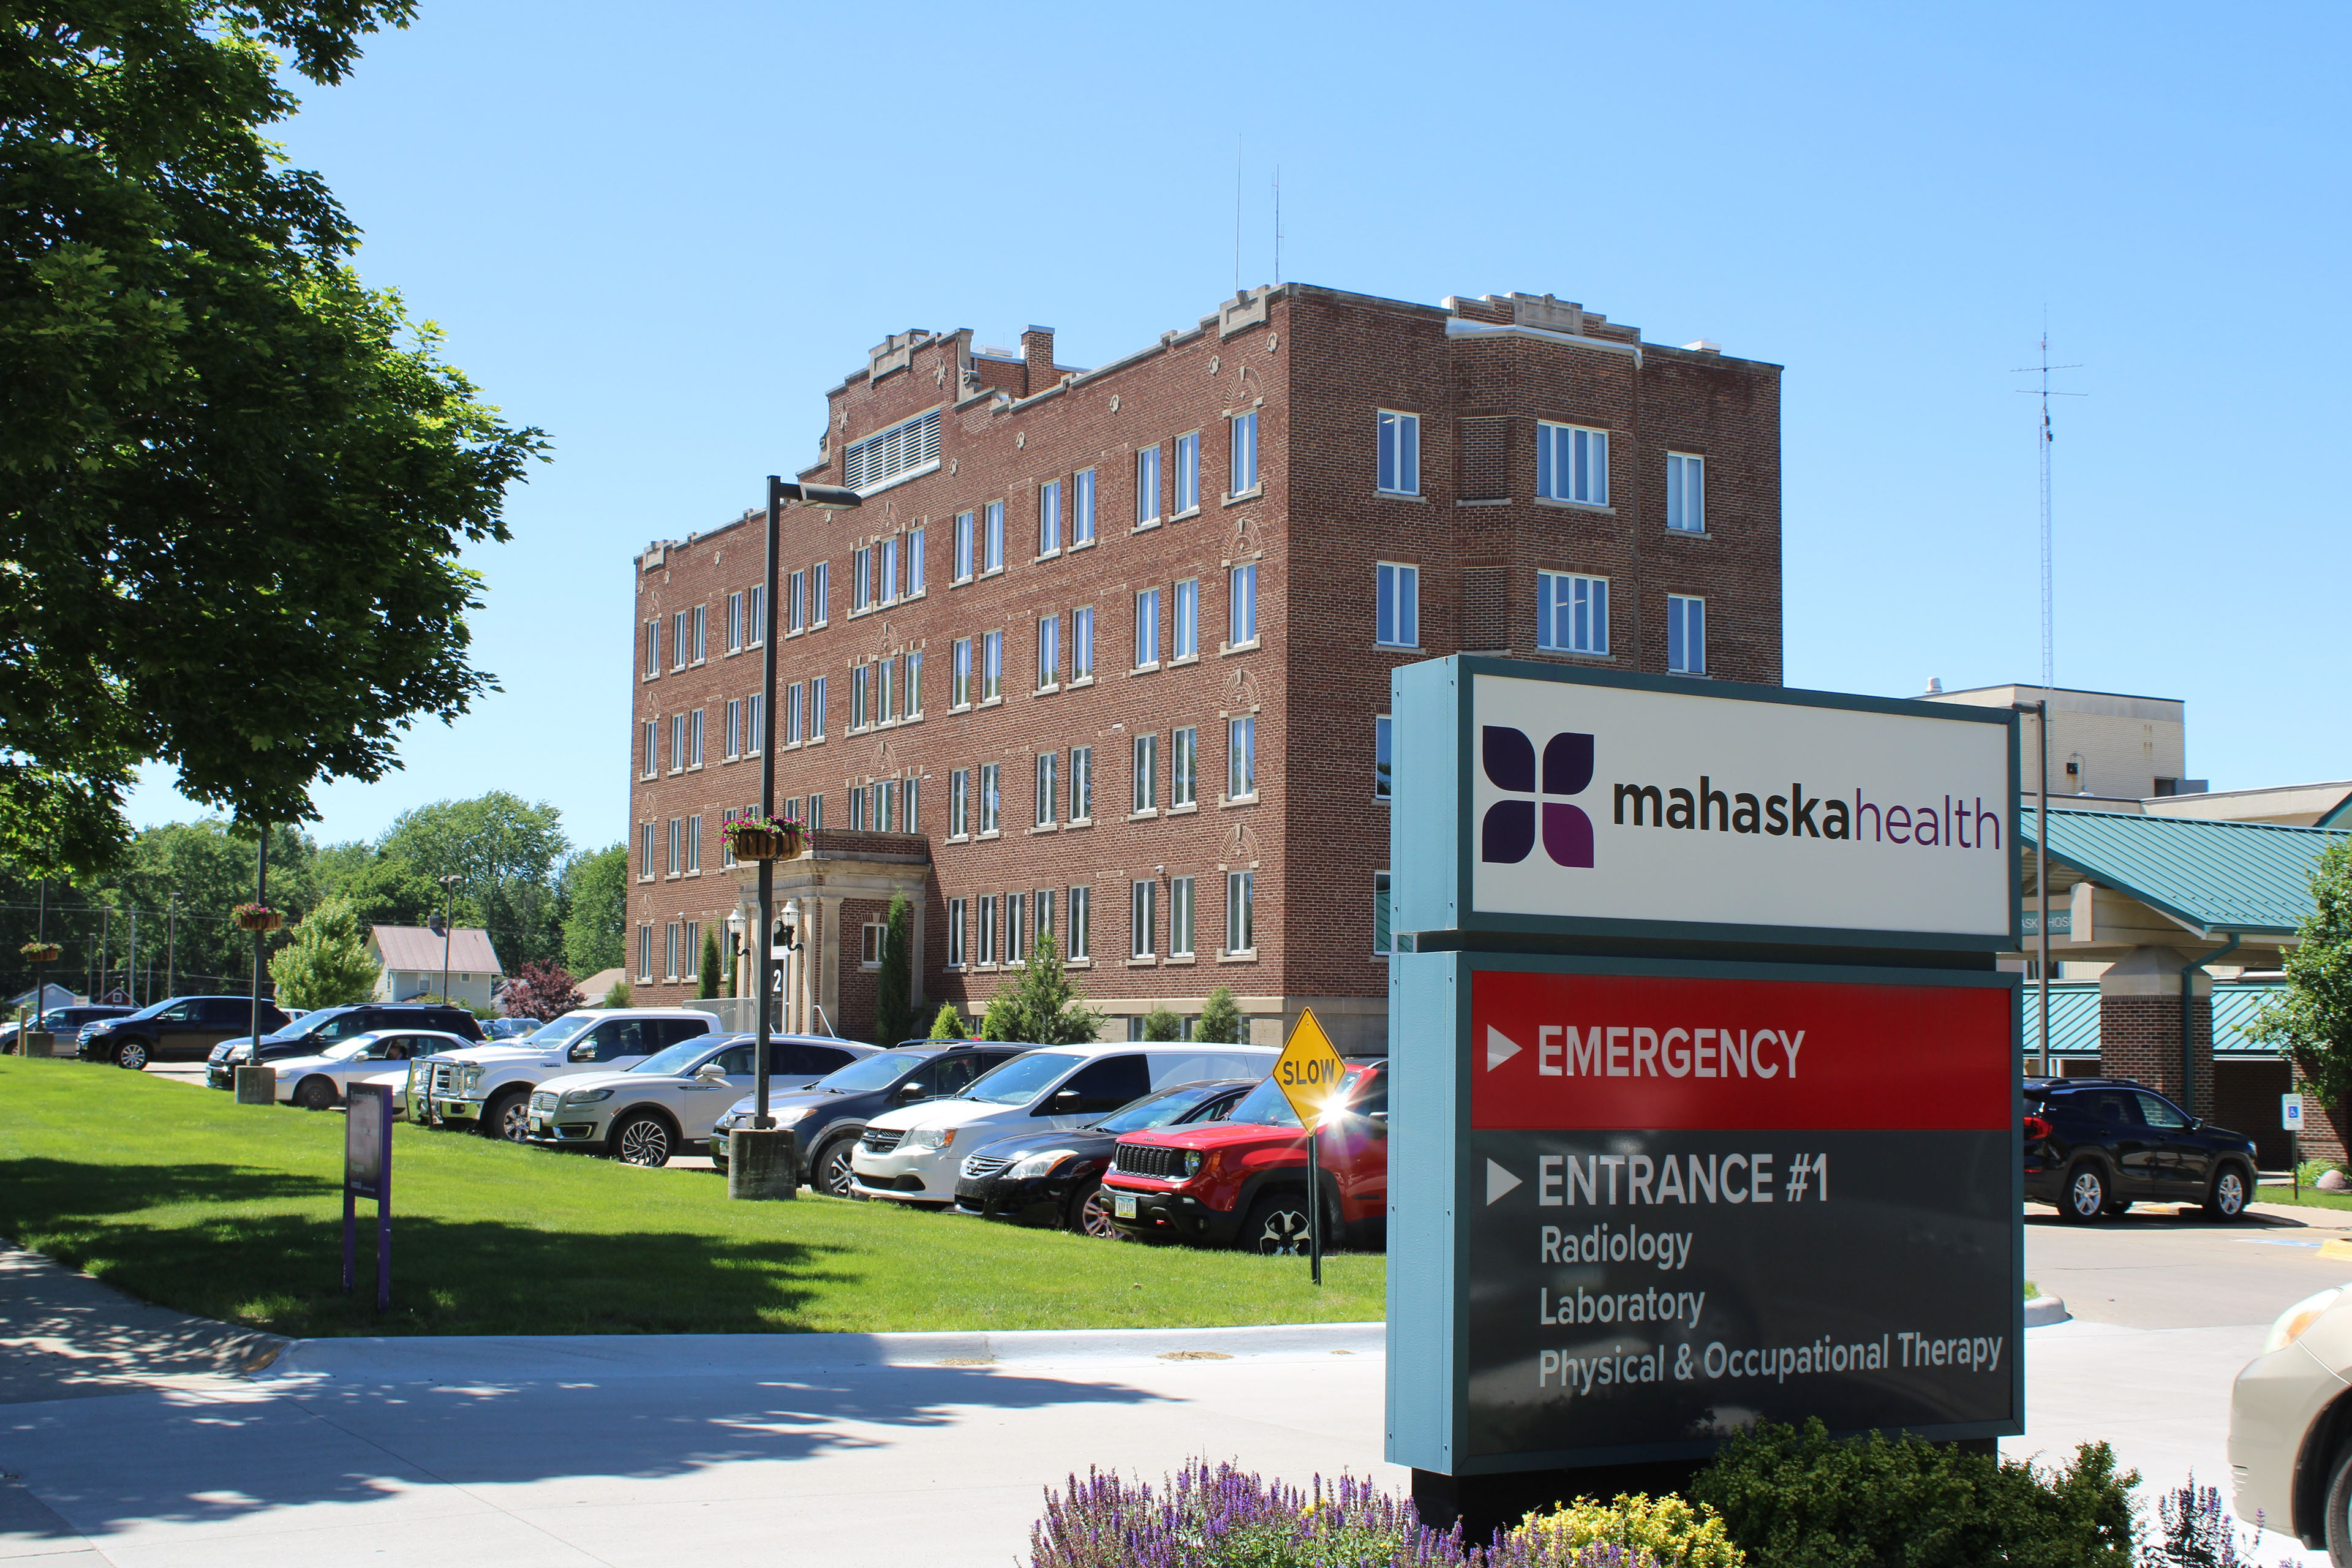 The exterior of the Mahaska Health hospital building. It is a brick building with a parking lot and bright green lawn in front. An entrance sign is stationed to the right.